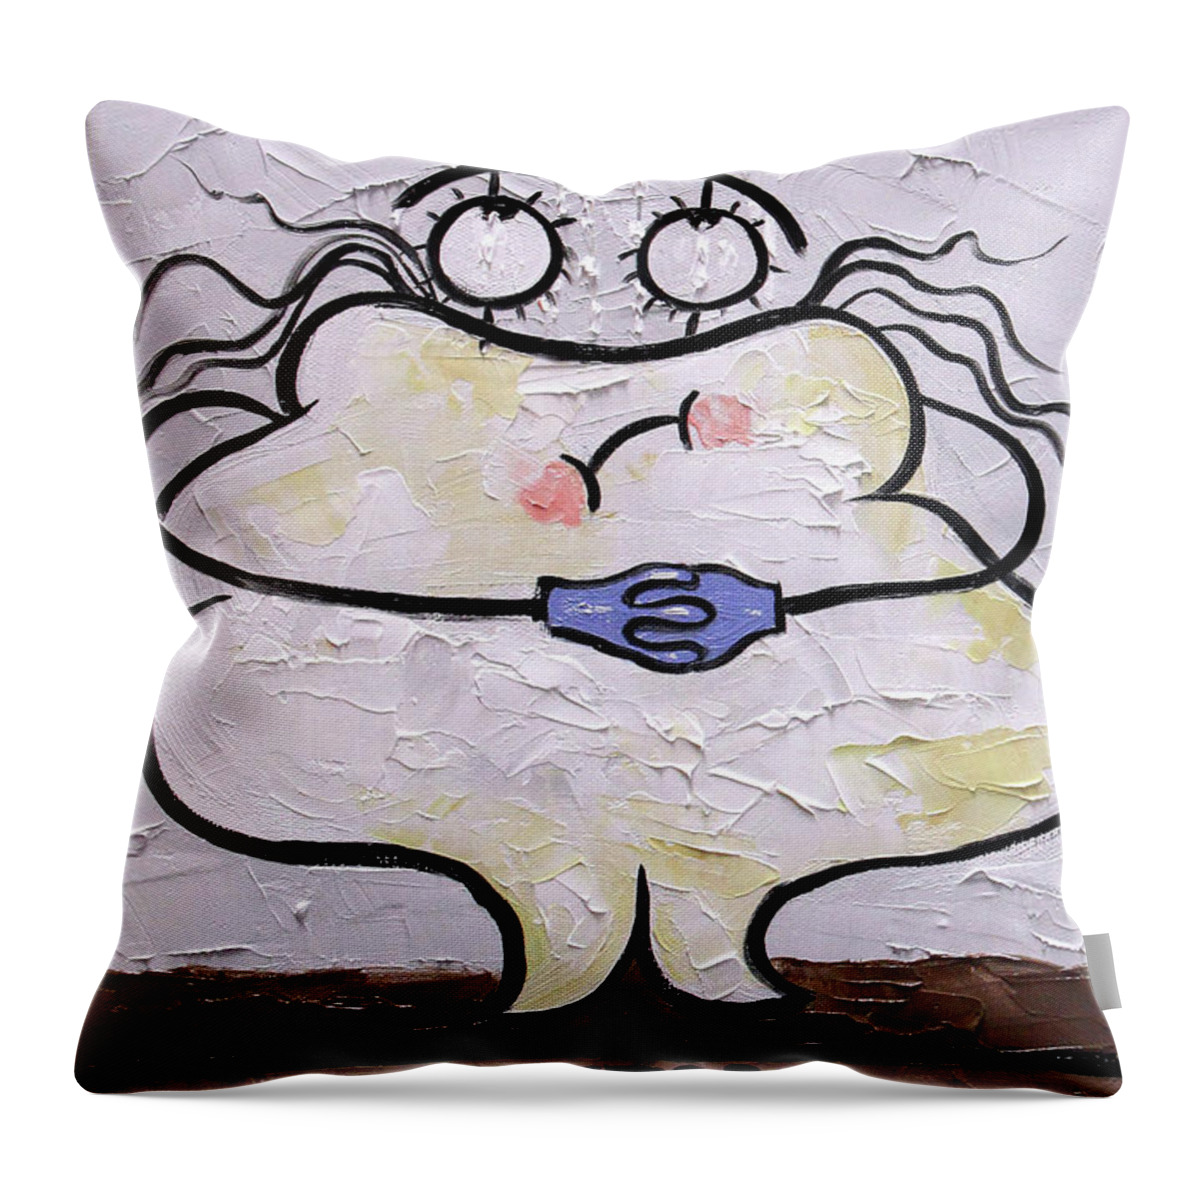 Before The Dentist Appointment Throw Pillow featuring the painting Before The Dentist Appointment by Anthony Falbo